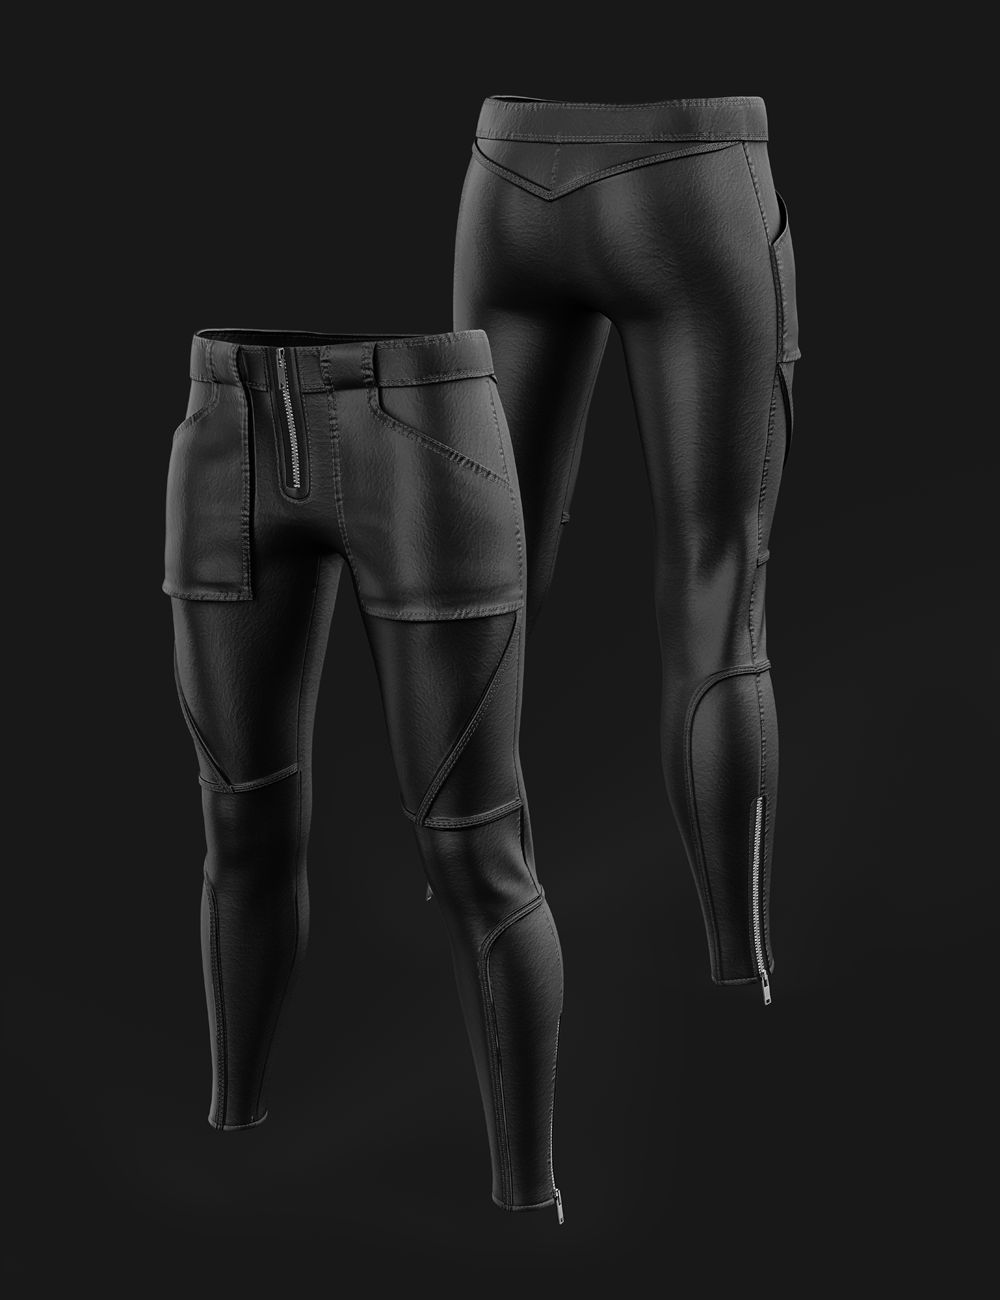 AJC Glamor Biker Outfit Pants for Genesis 8 and 8.1 Females